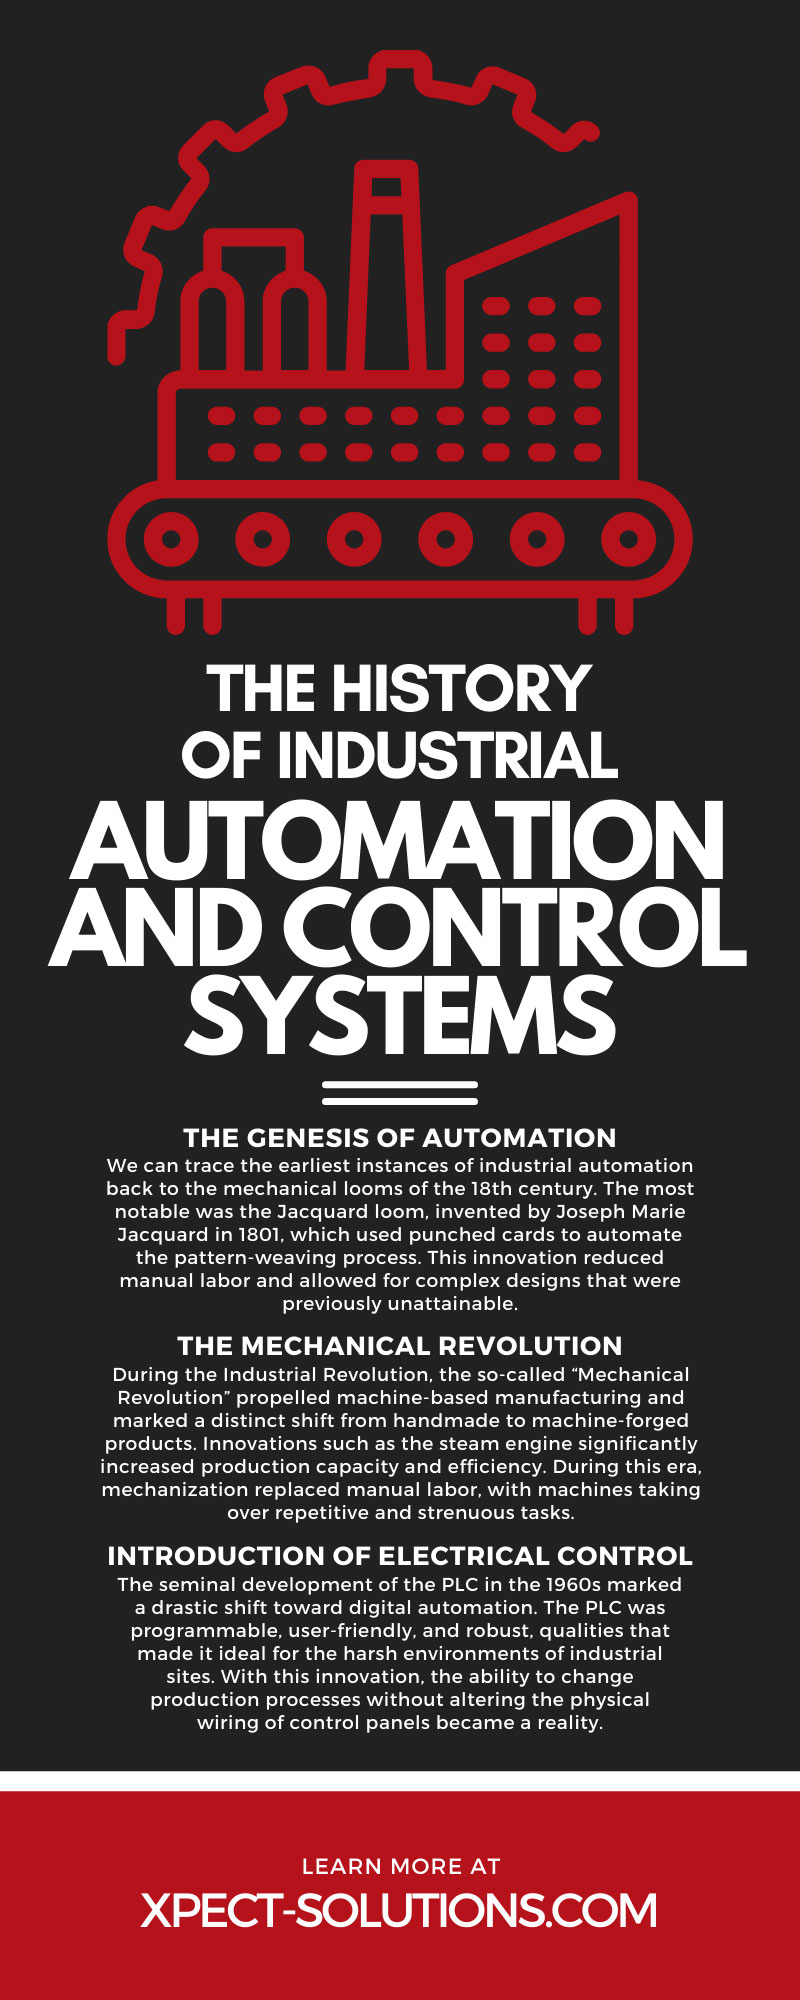 The History of Industrial Automation and Control Systems